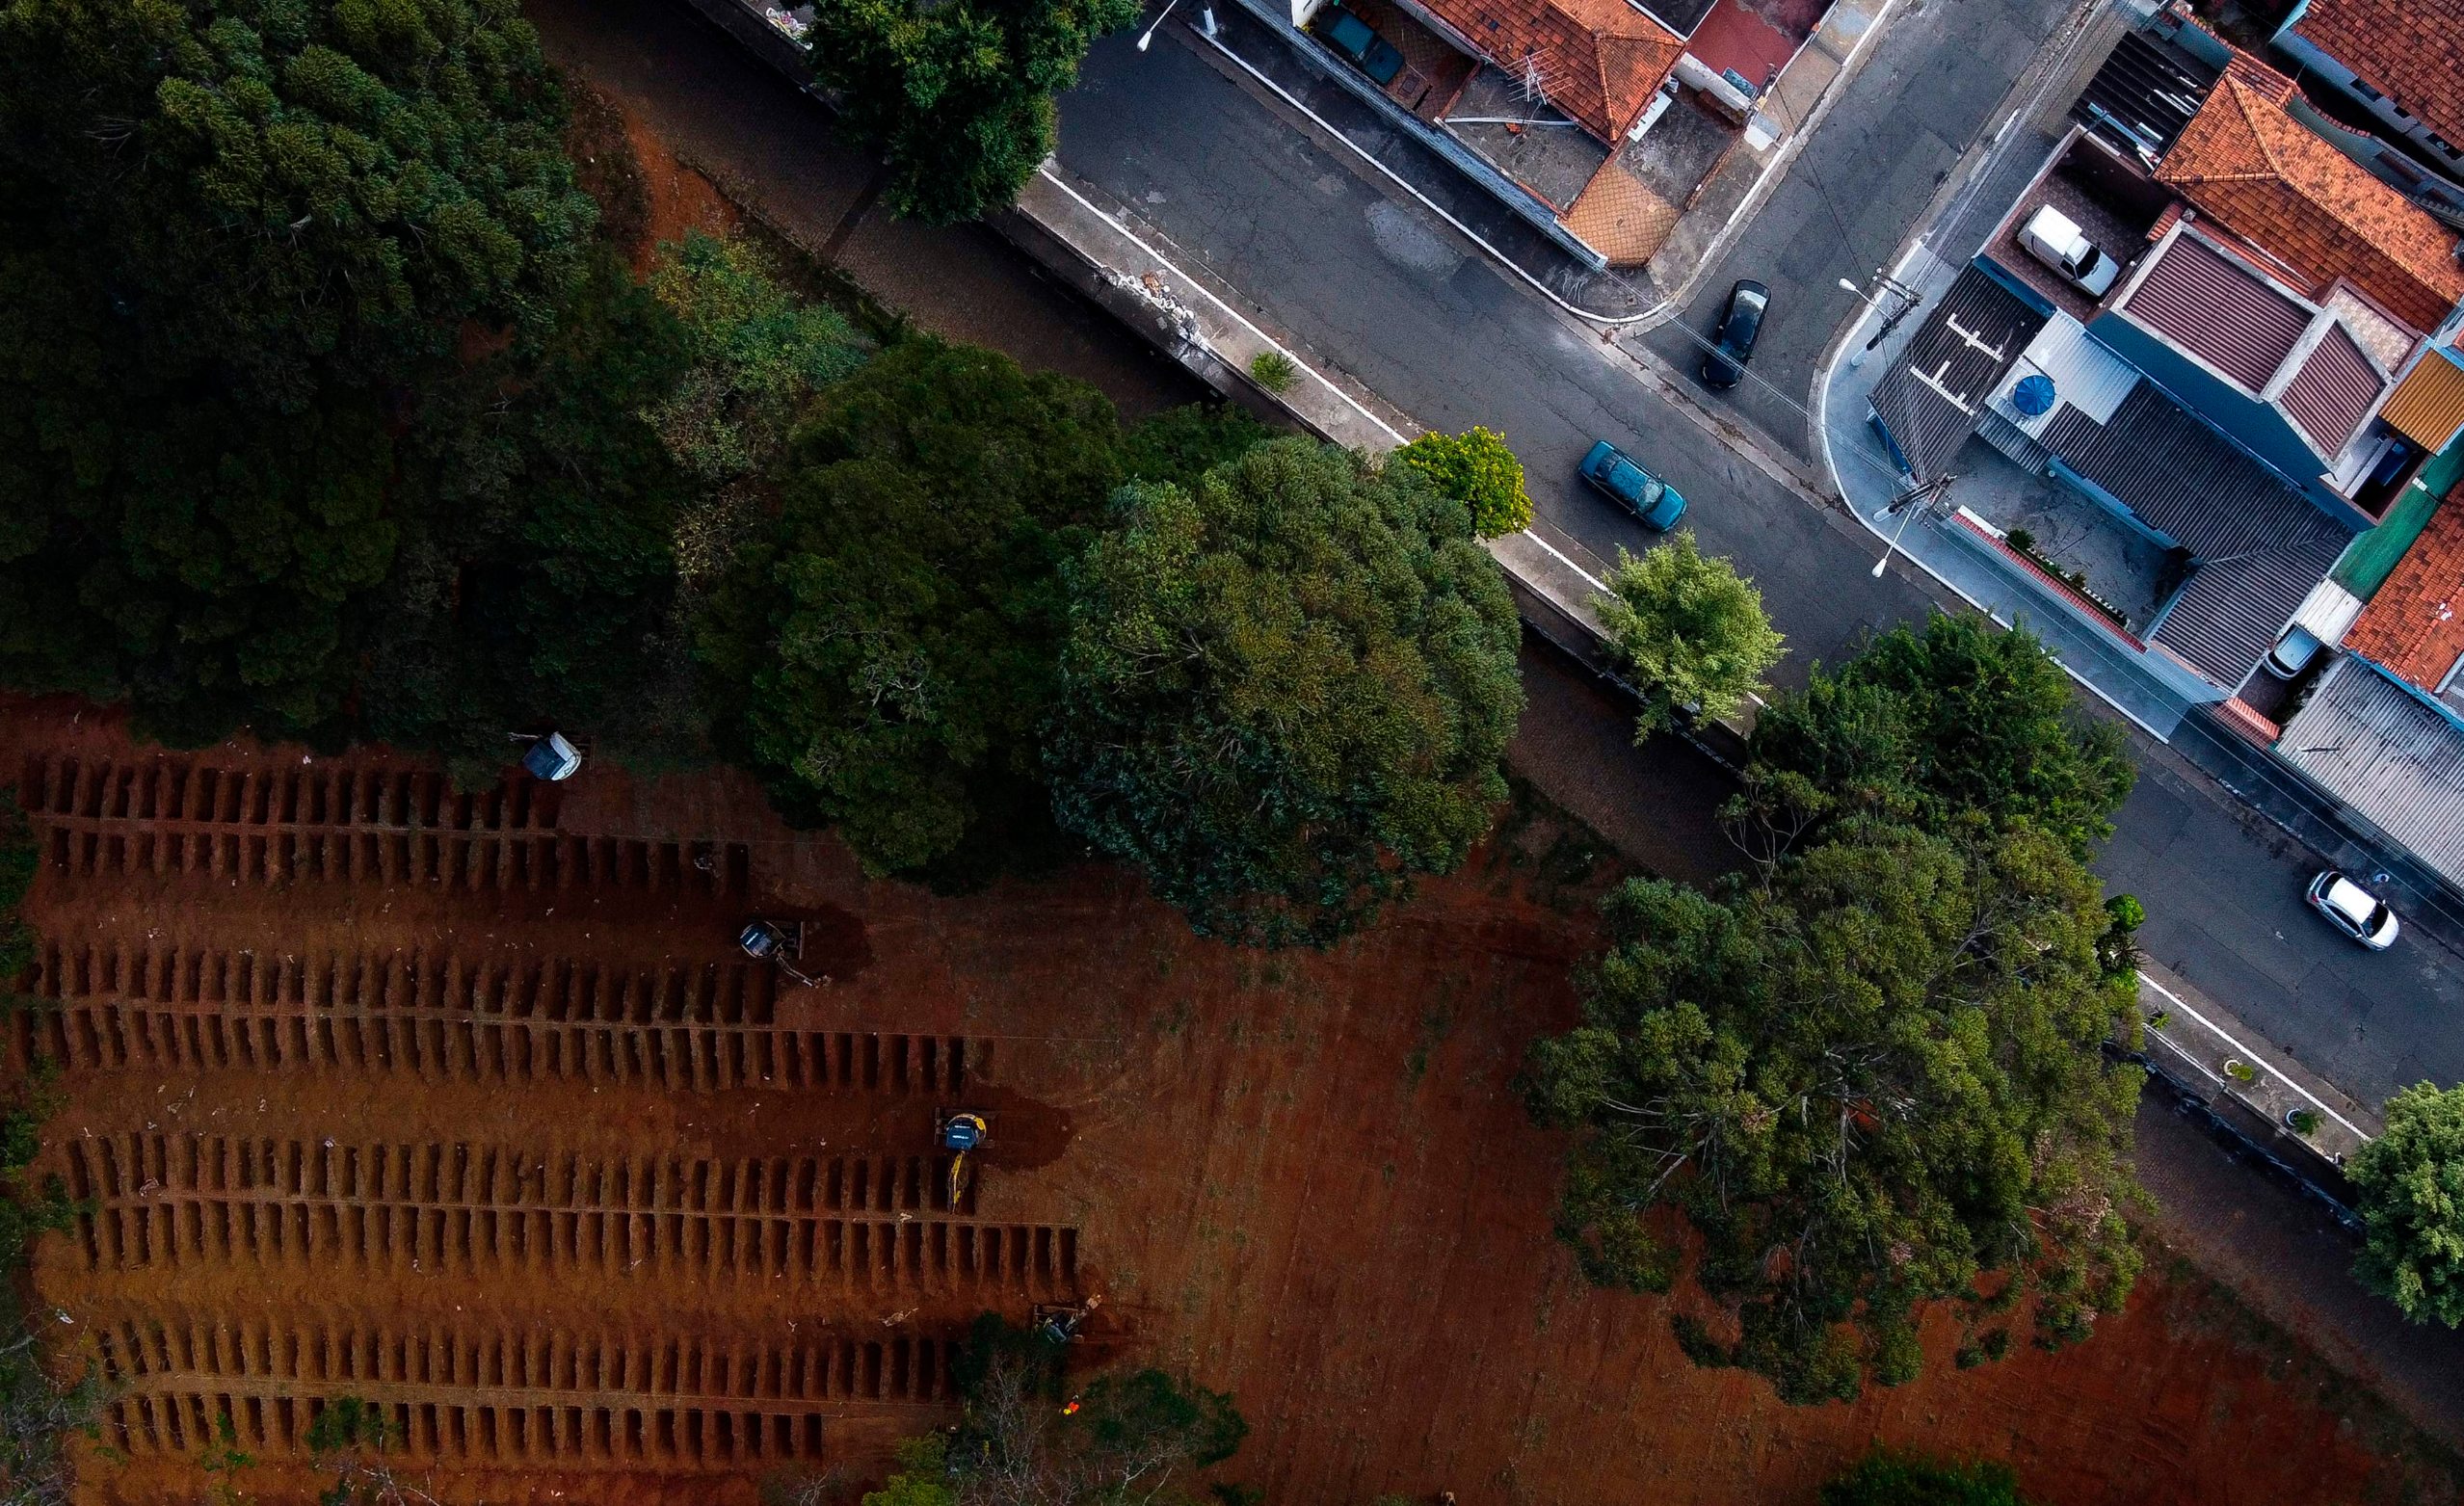 Aerial view of workers on backhoes digging graves in the Vila Formosa cemetery, due to an expected increase in deaths within the COVID-19 coronavirus pandemic, in the city of Sao Paulo, Brazil, 21 April 2020. (Photo by Miguel SCHINCARIOL / AFP)